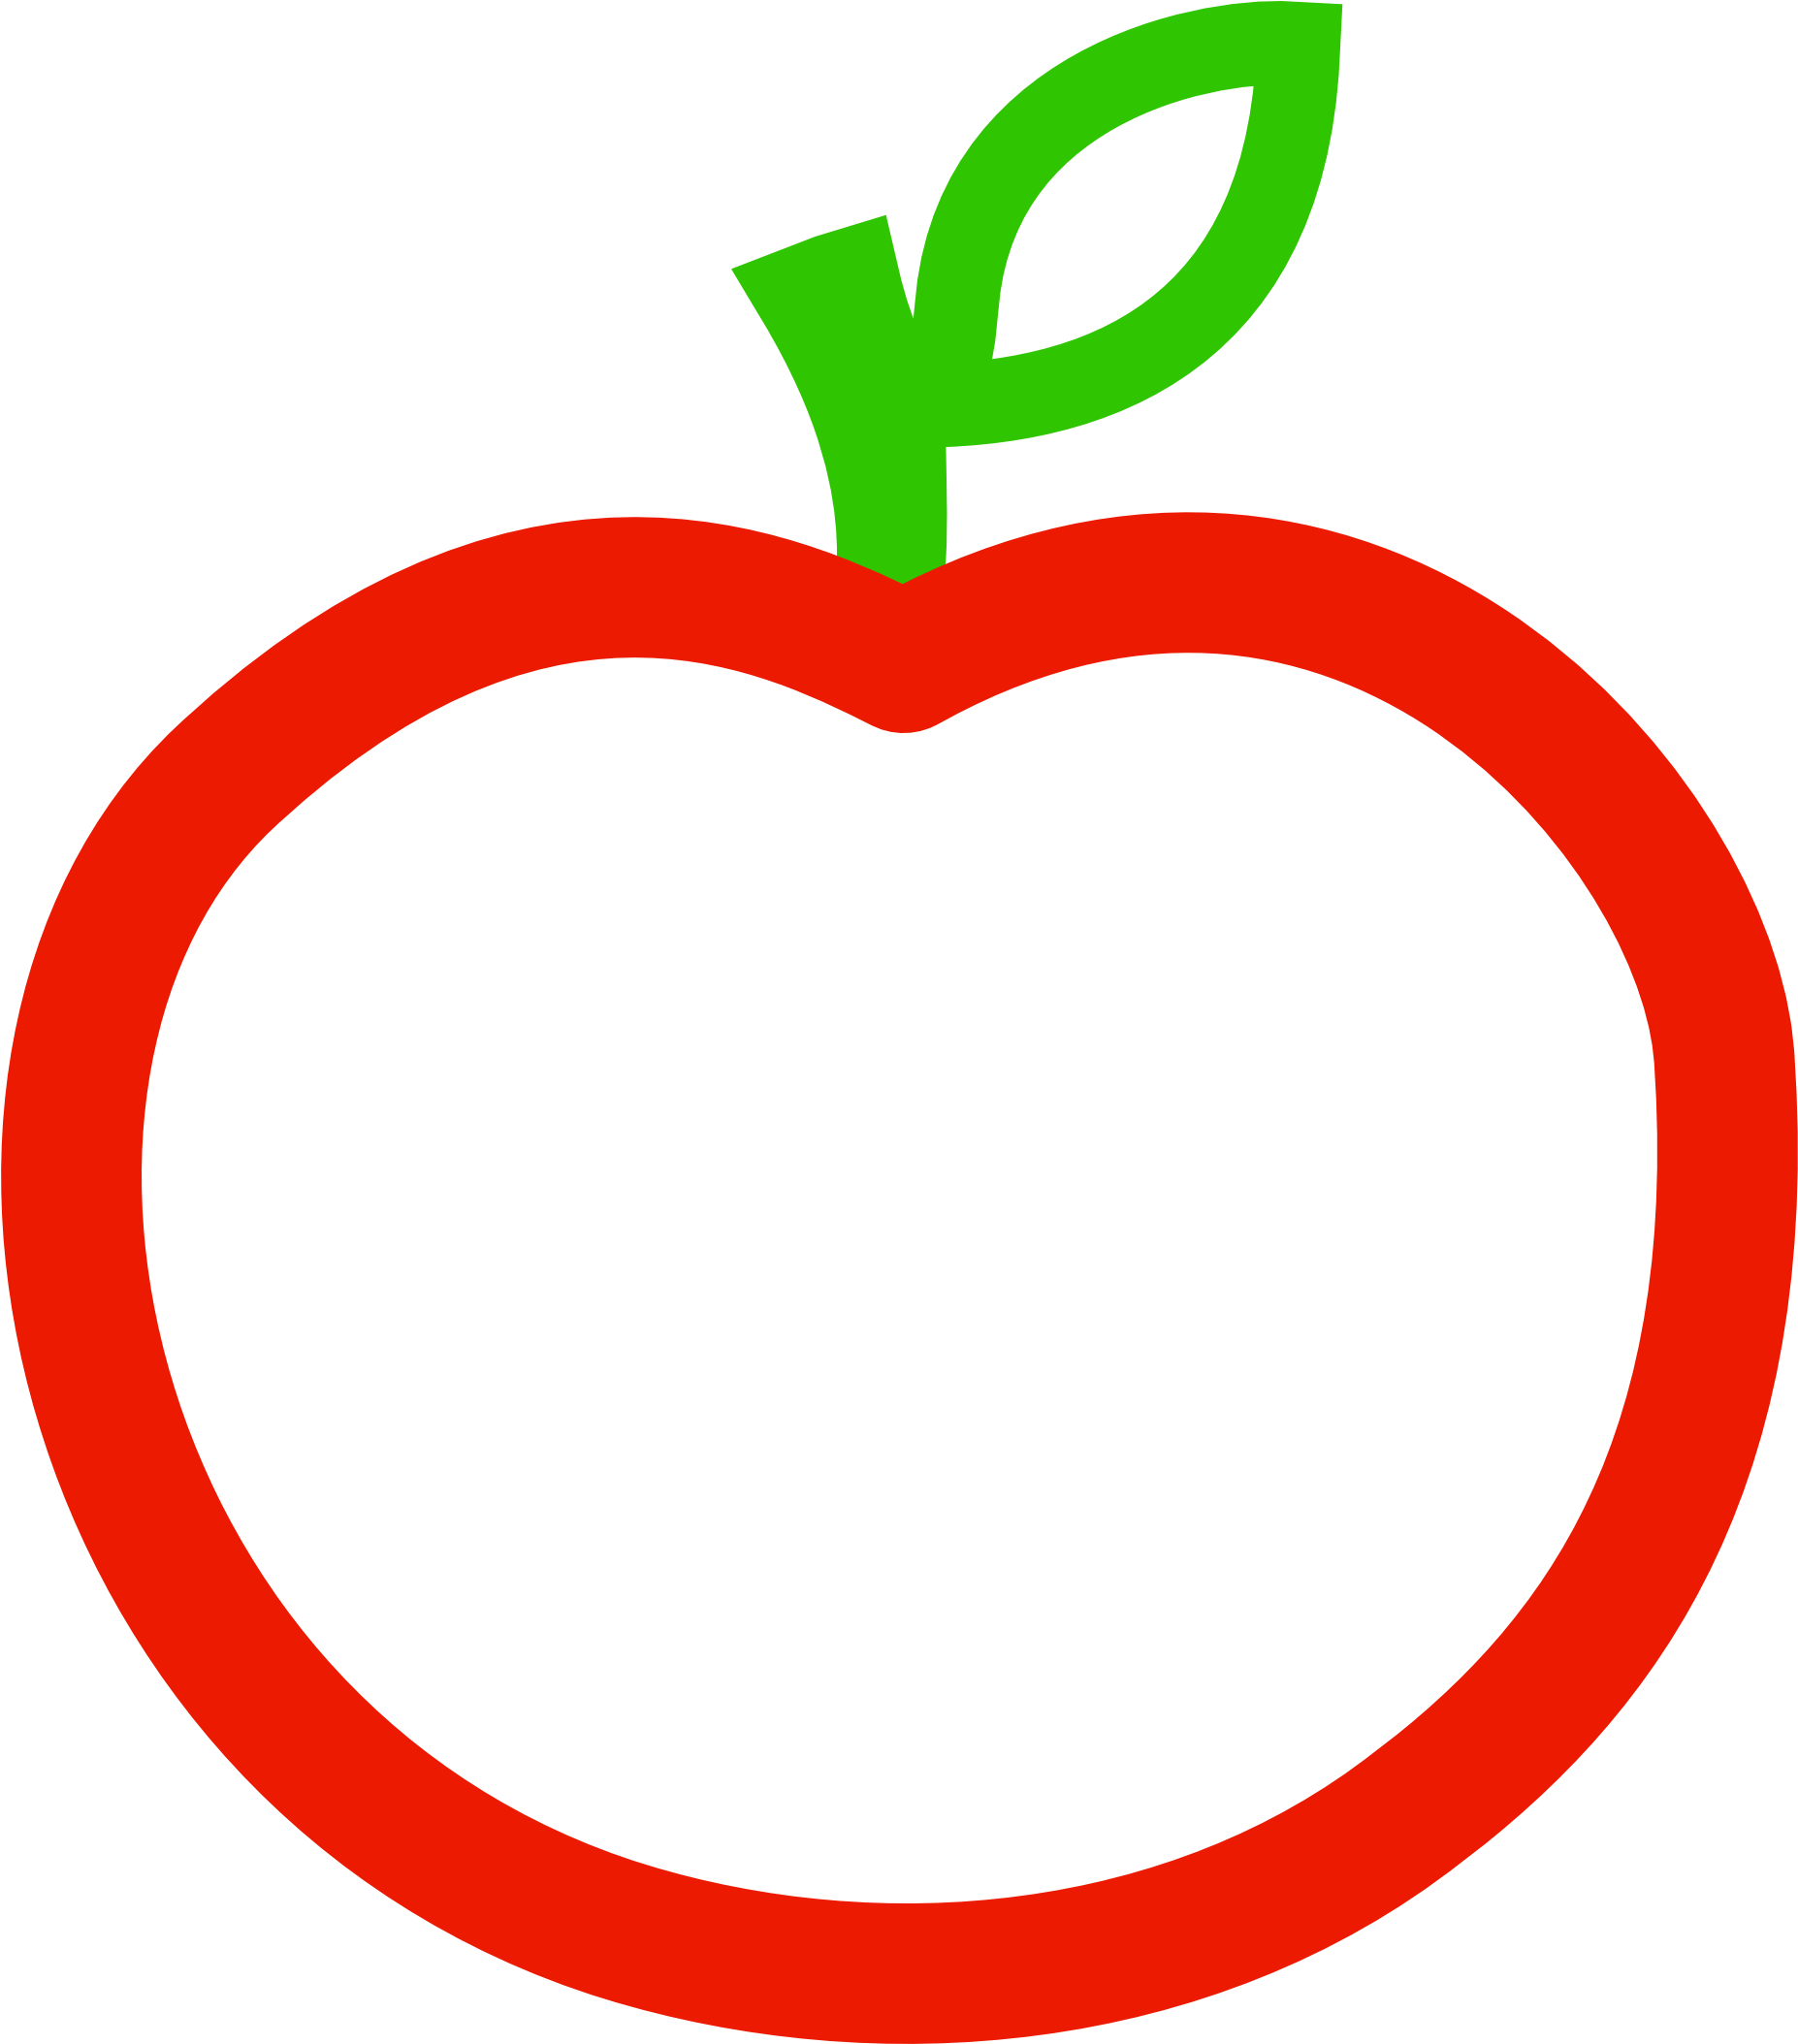 Stylized Red Apple Graphic PNG